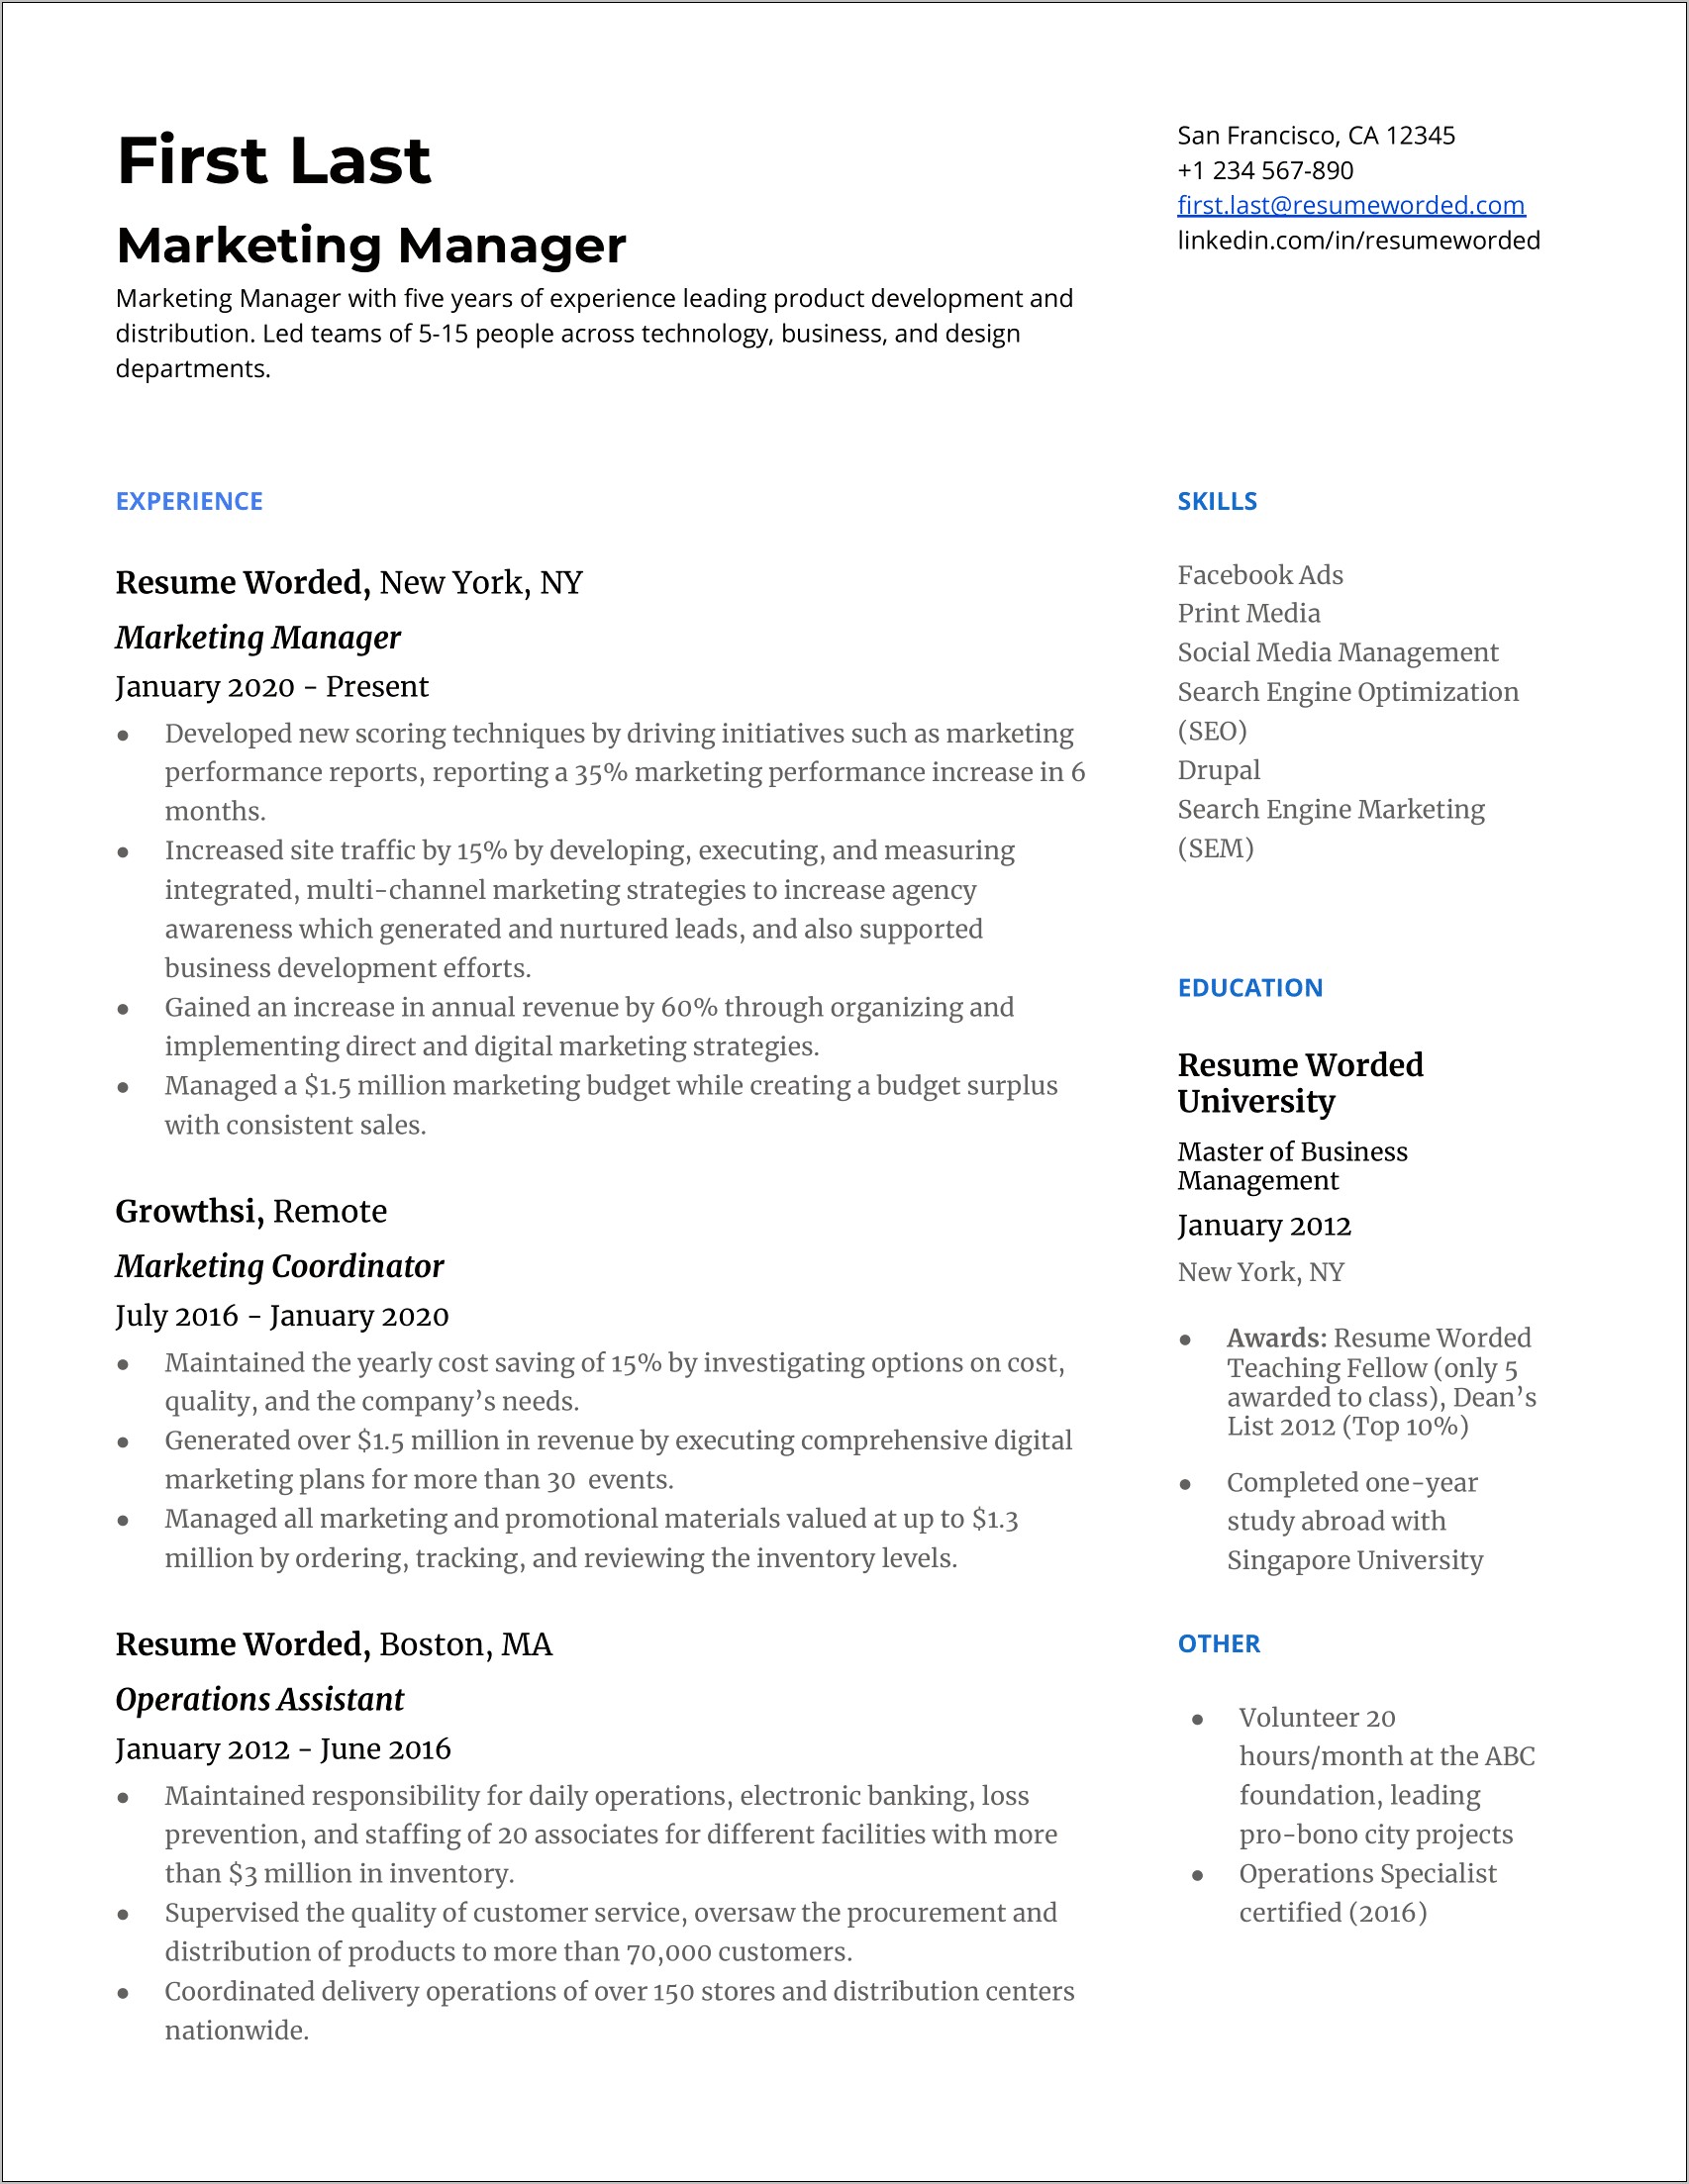 Banking Client Service Manager Resume